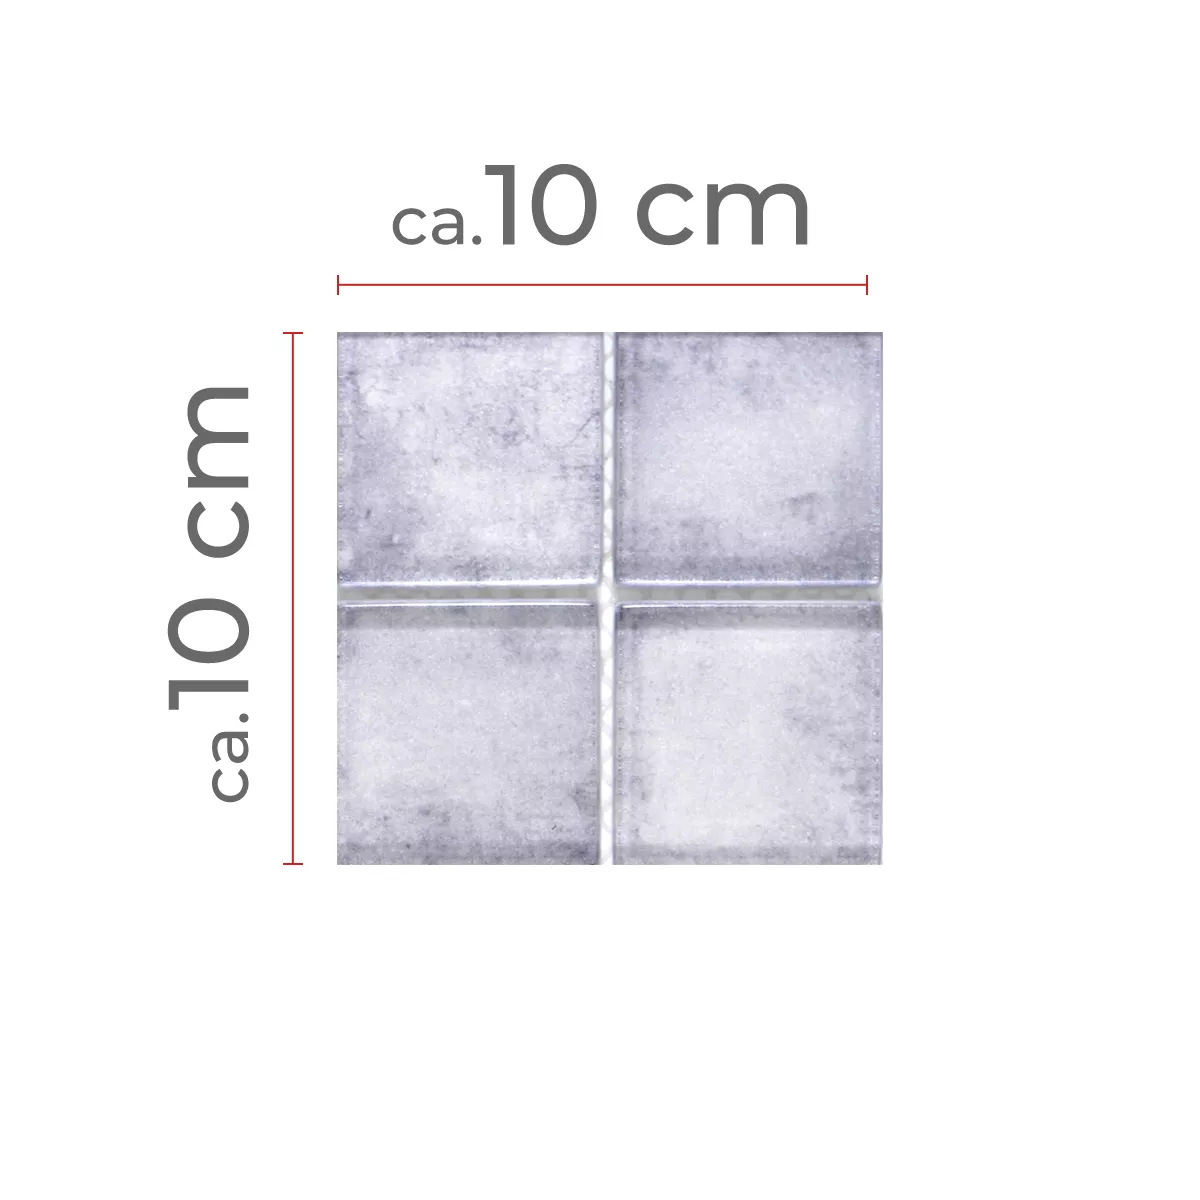 Sample Glass Mosaic Tiles Clementine Grey